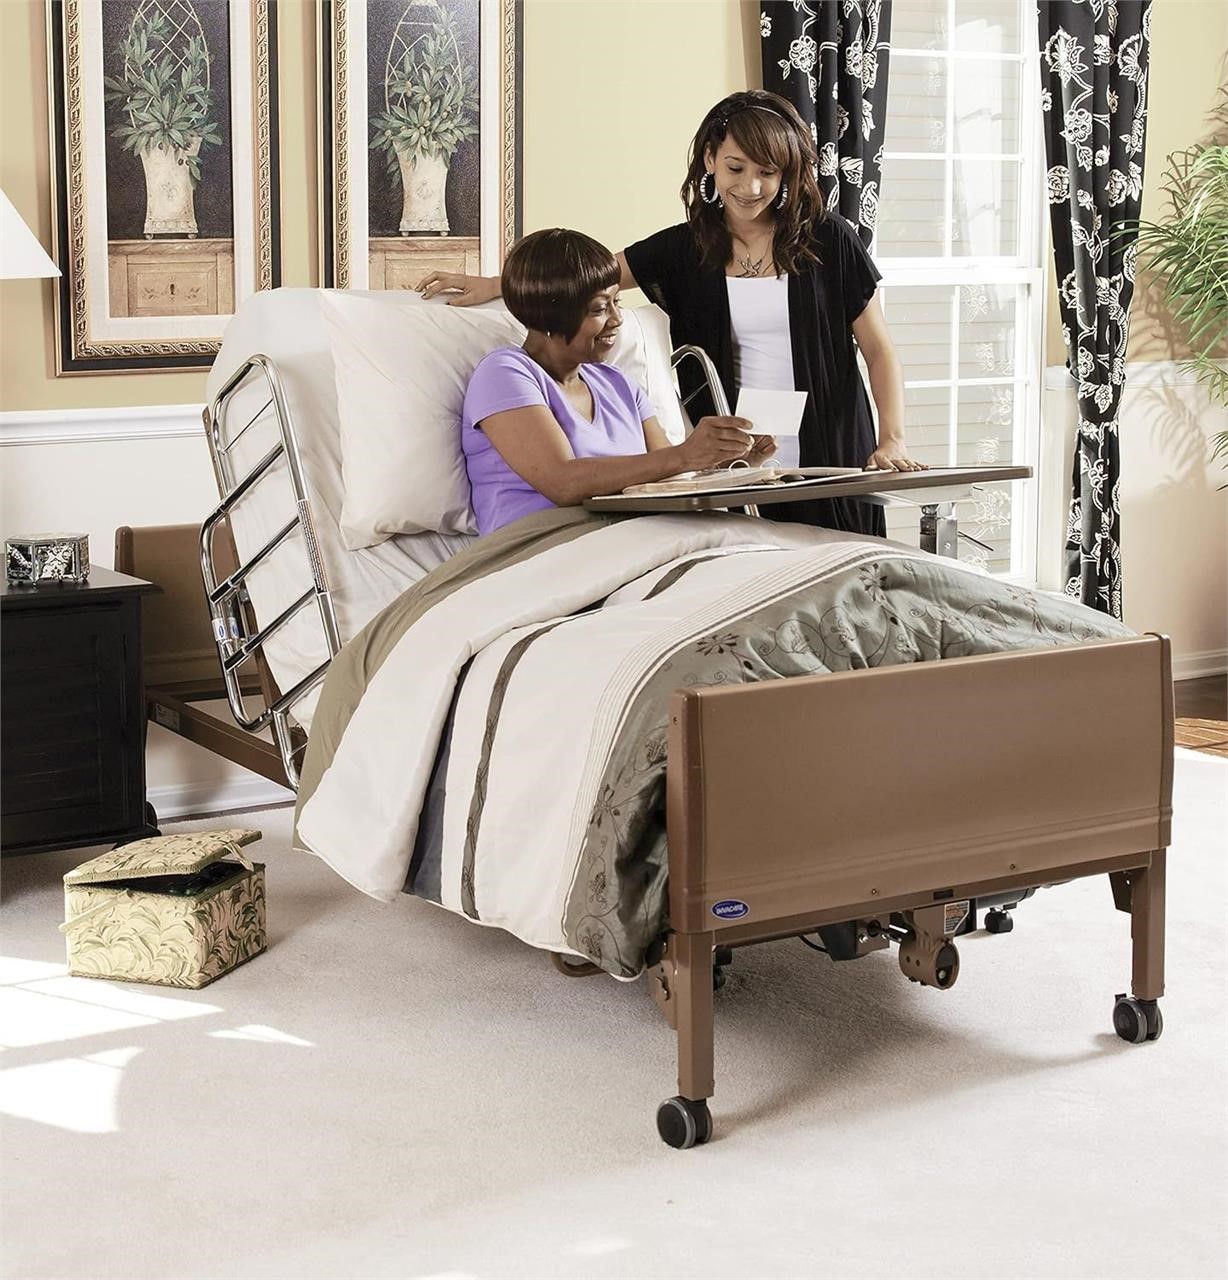 FULL Invacare Electric Homecare Bed